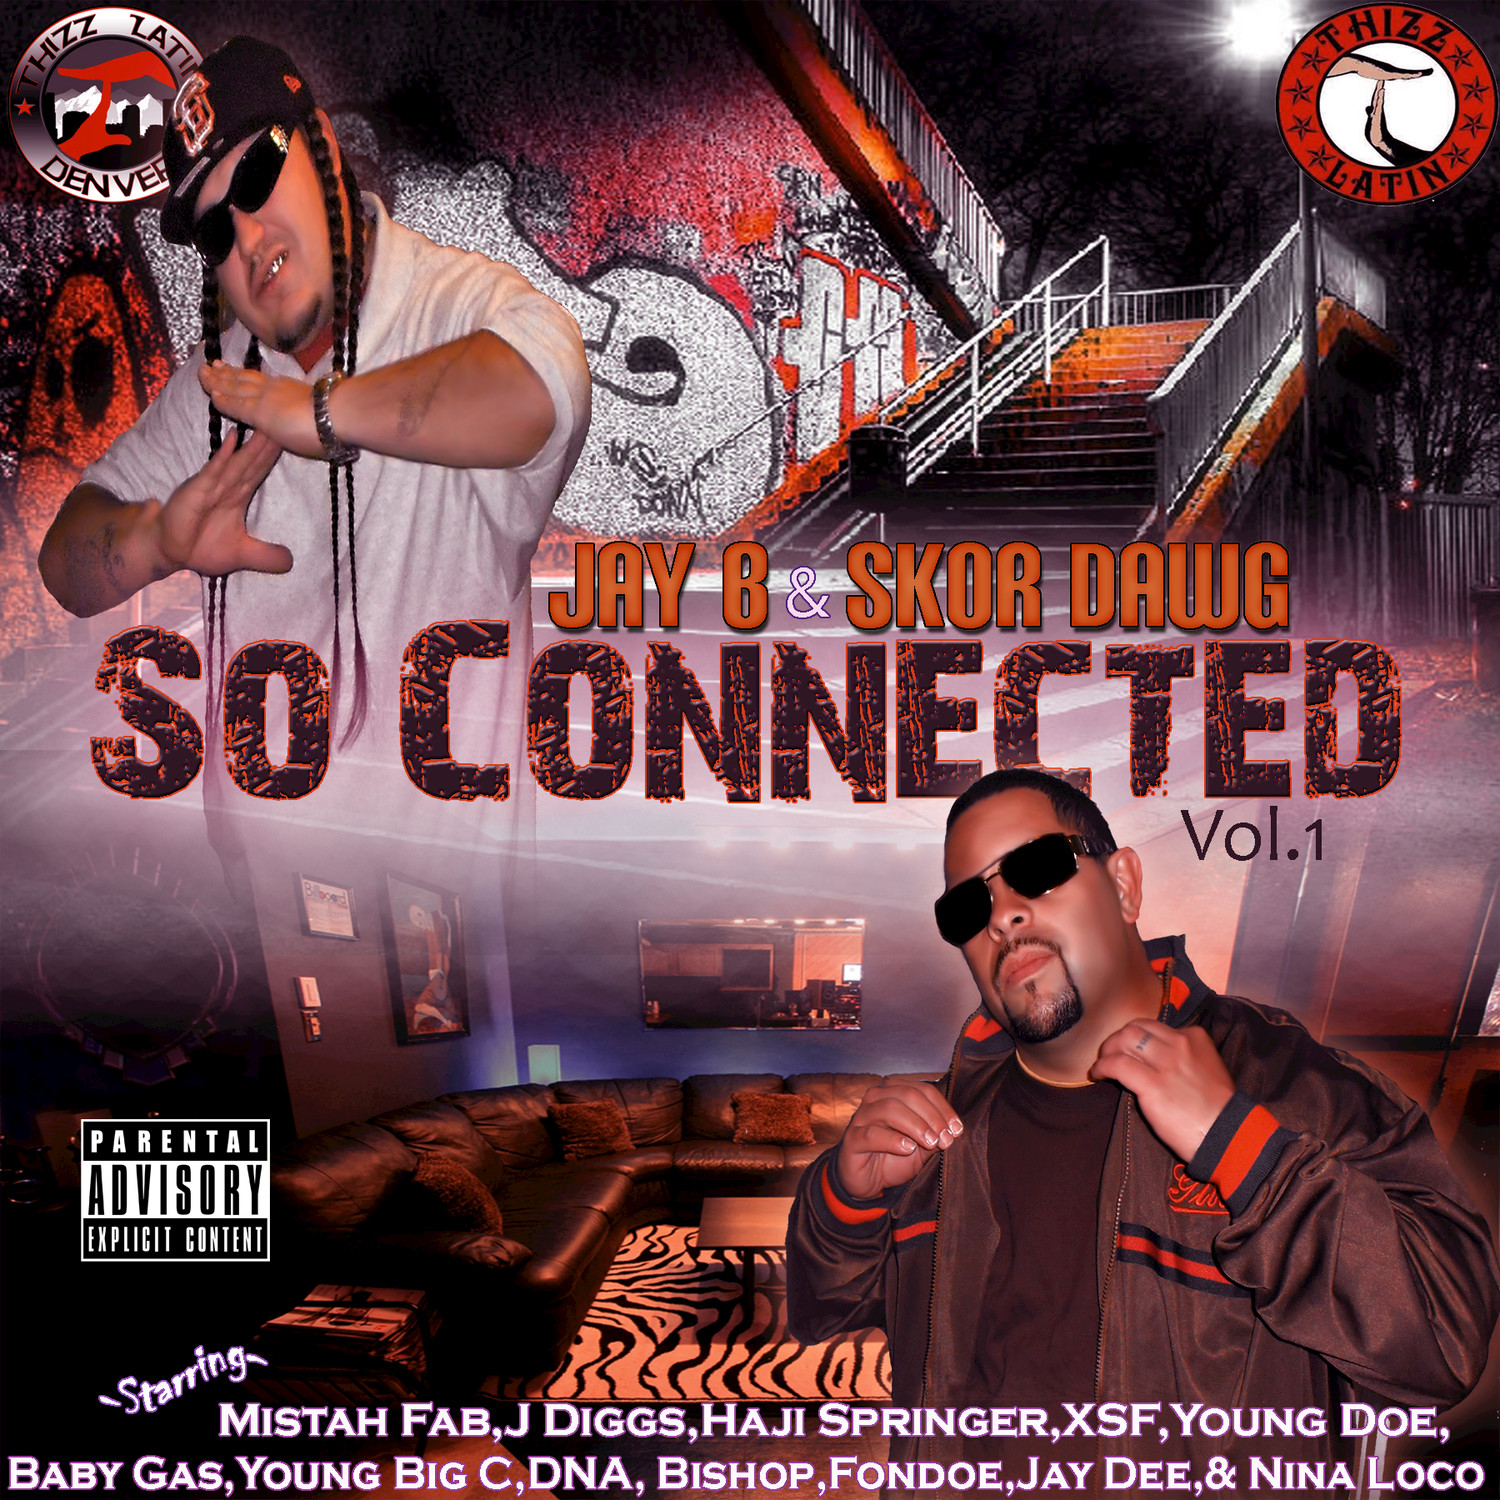 So Connected, Vol. 1